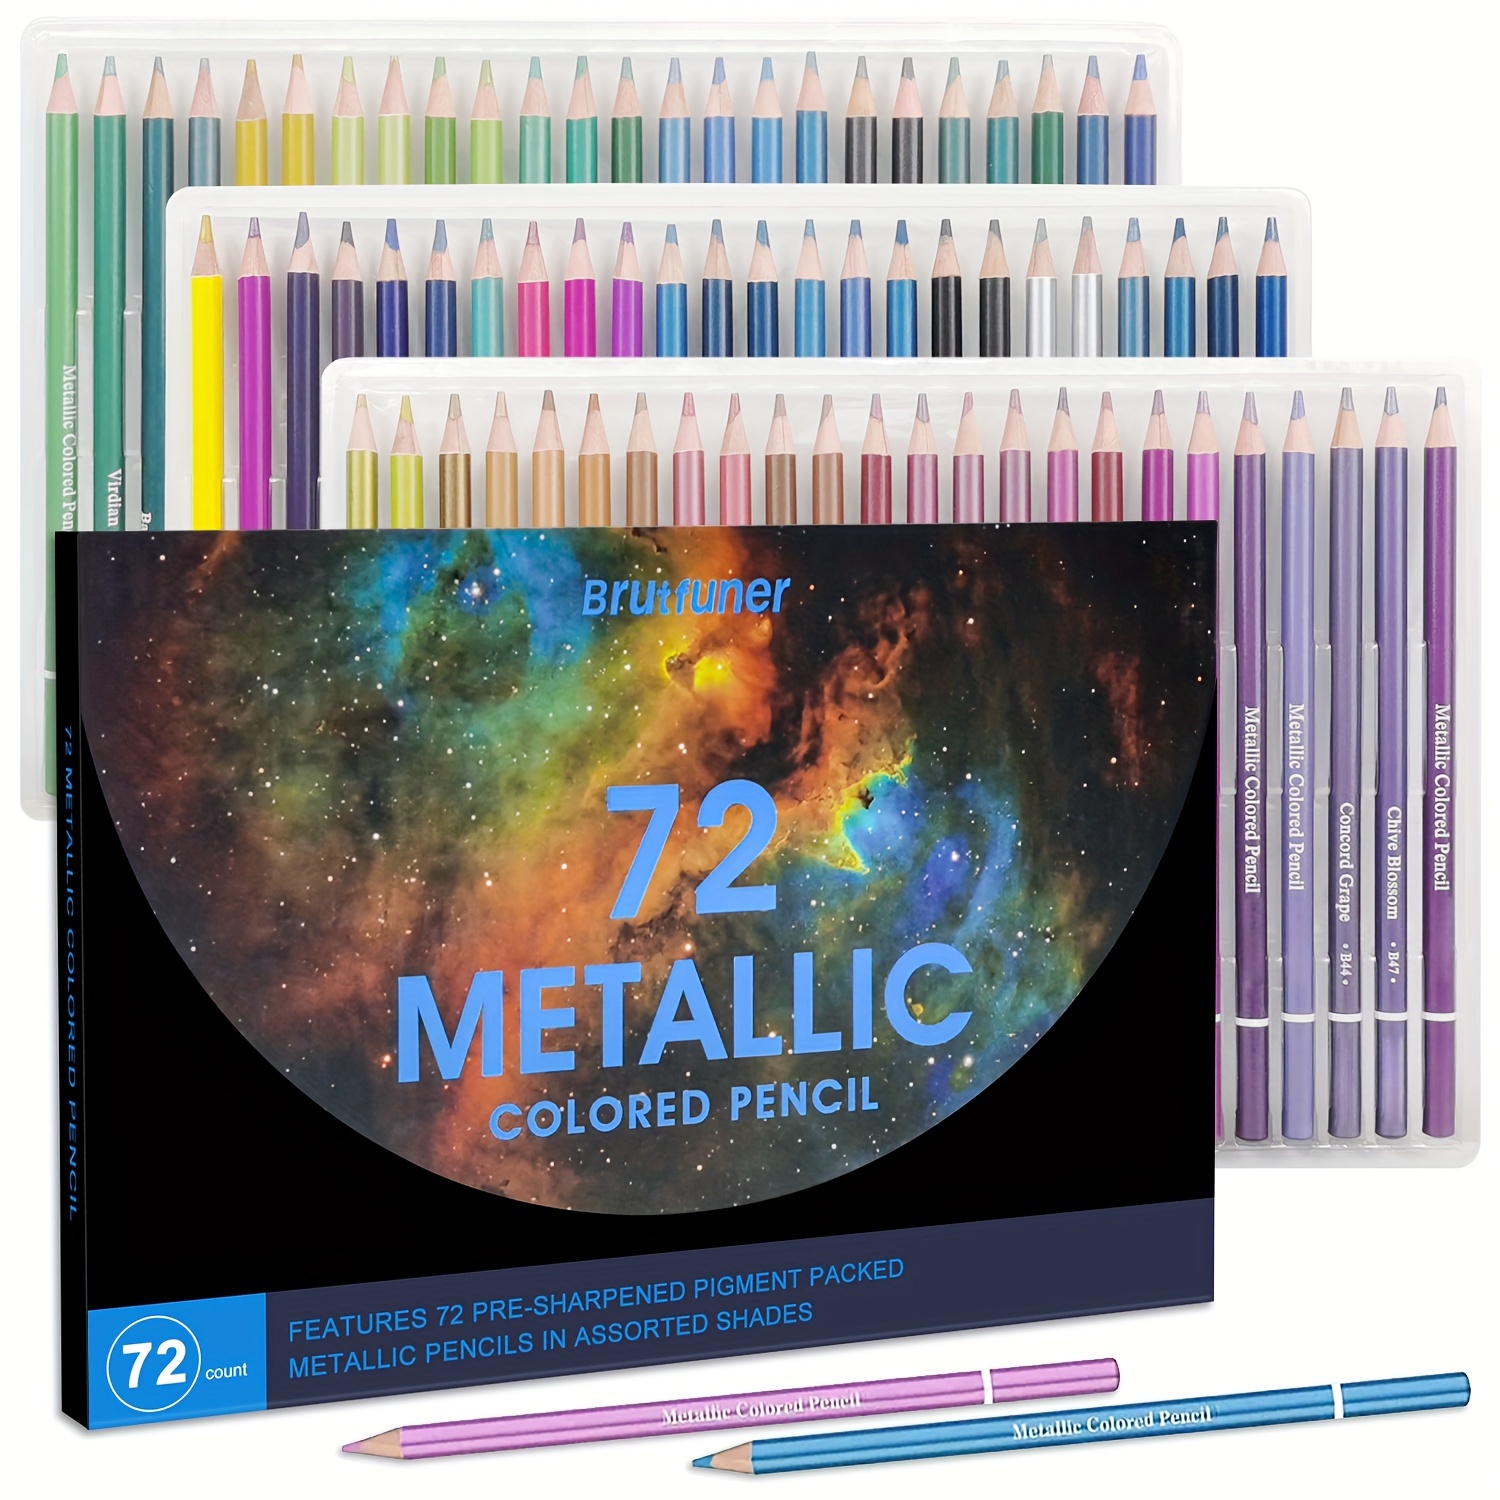 

72 Metallic Colored Pencil Set - Premium Artist Lead, 72 Vibrant Colors, Pre-sharpened, Ideal For Coloring, Blending, And Layering